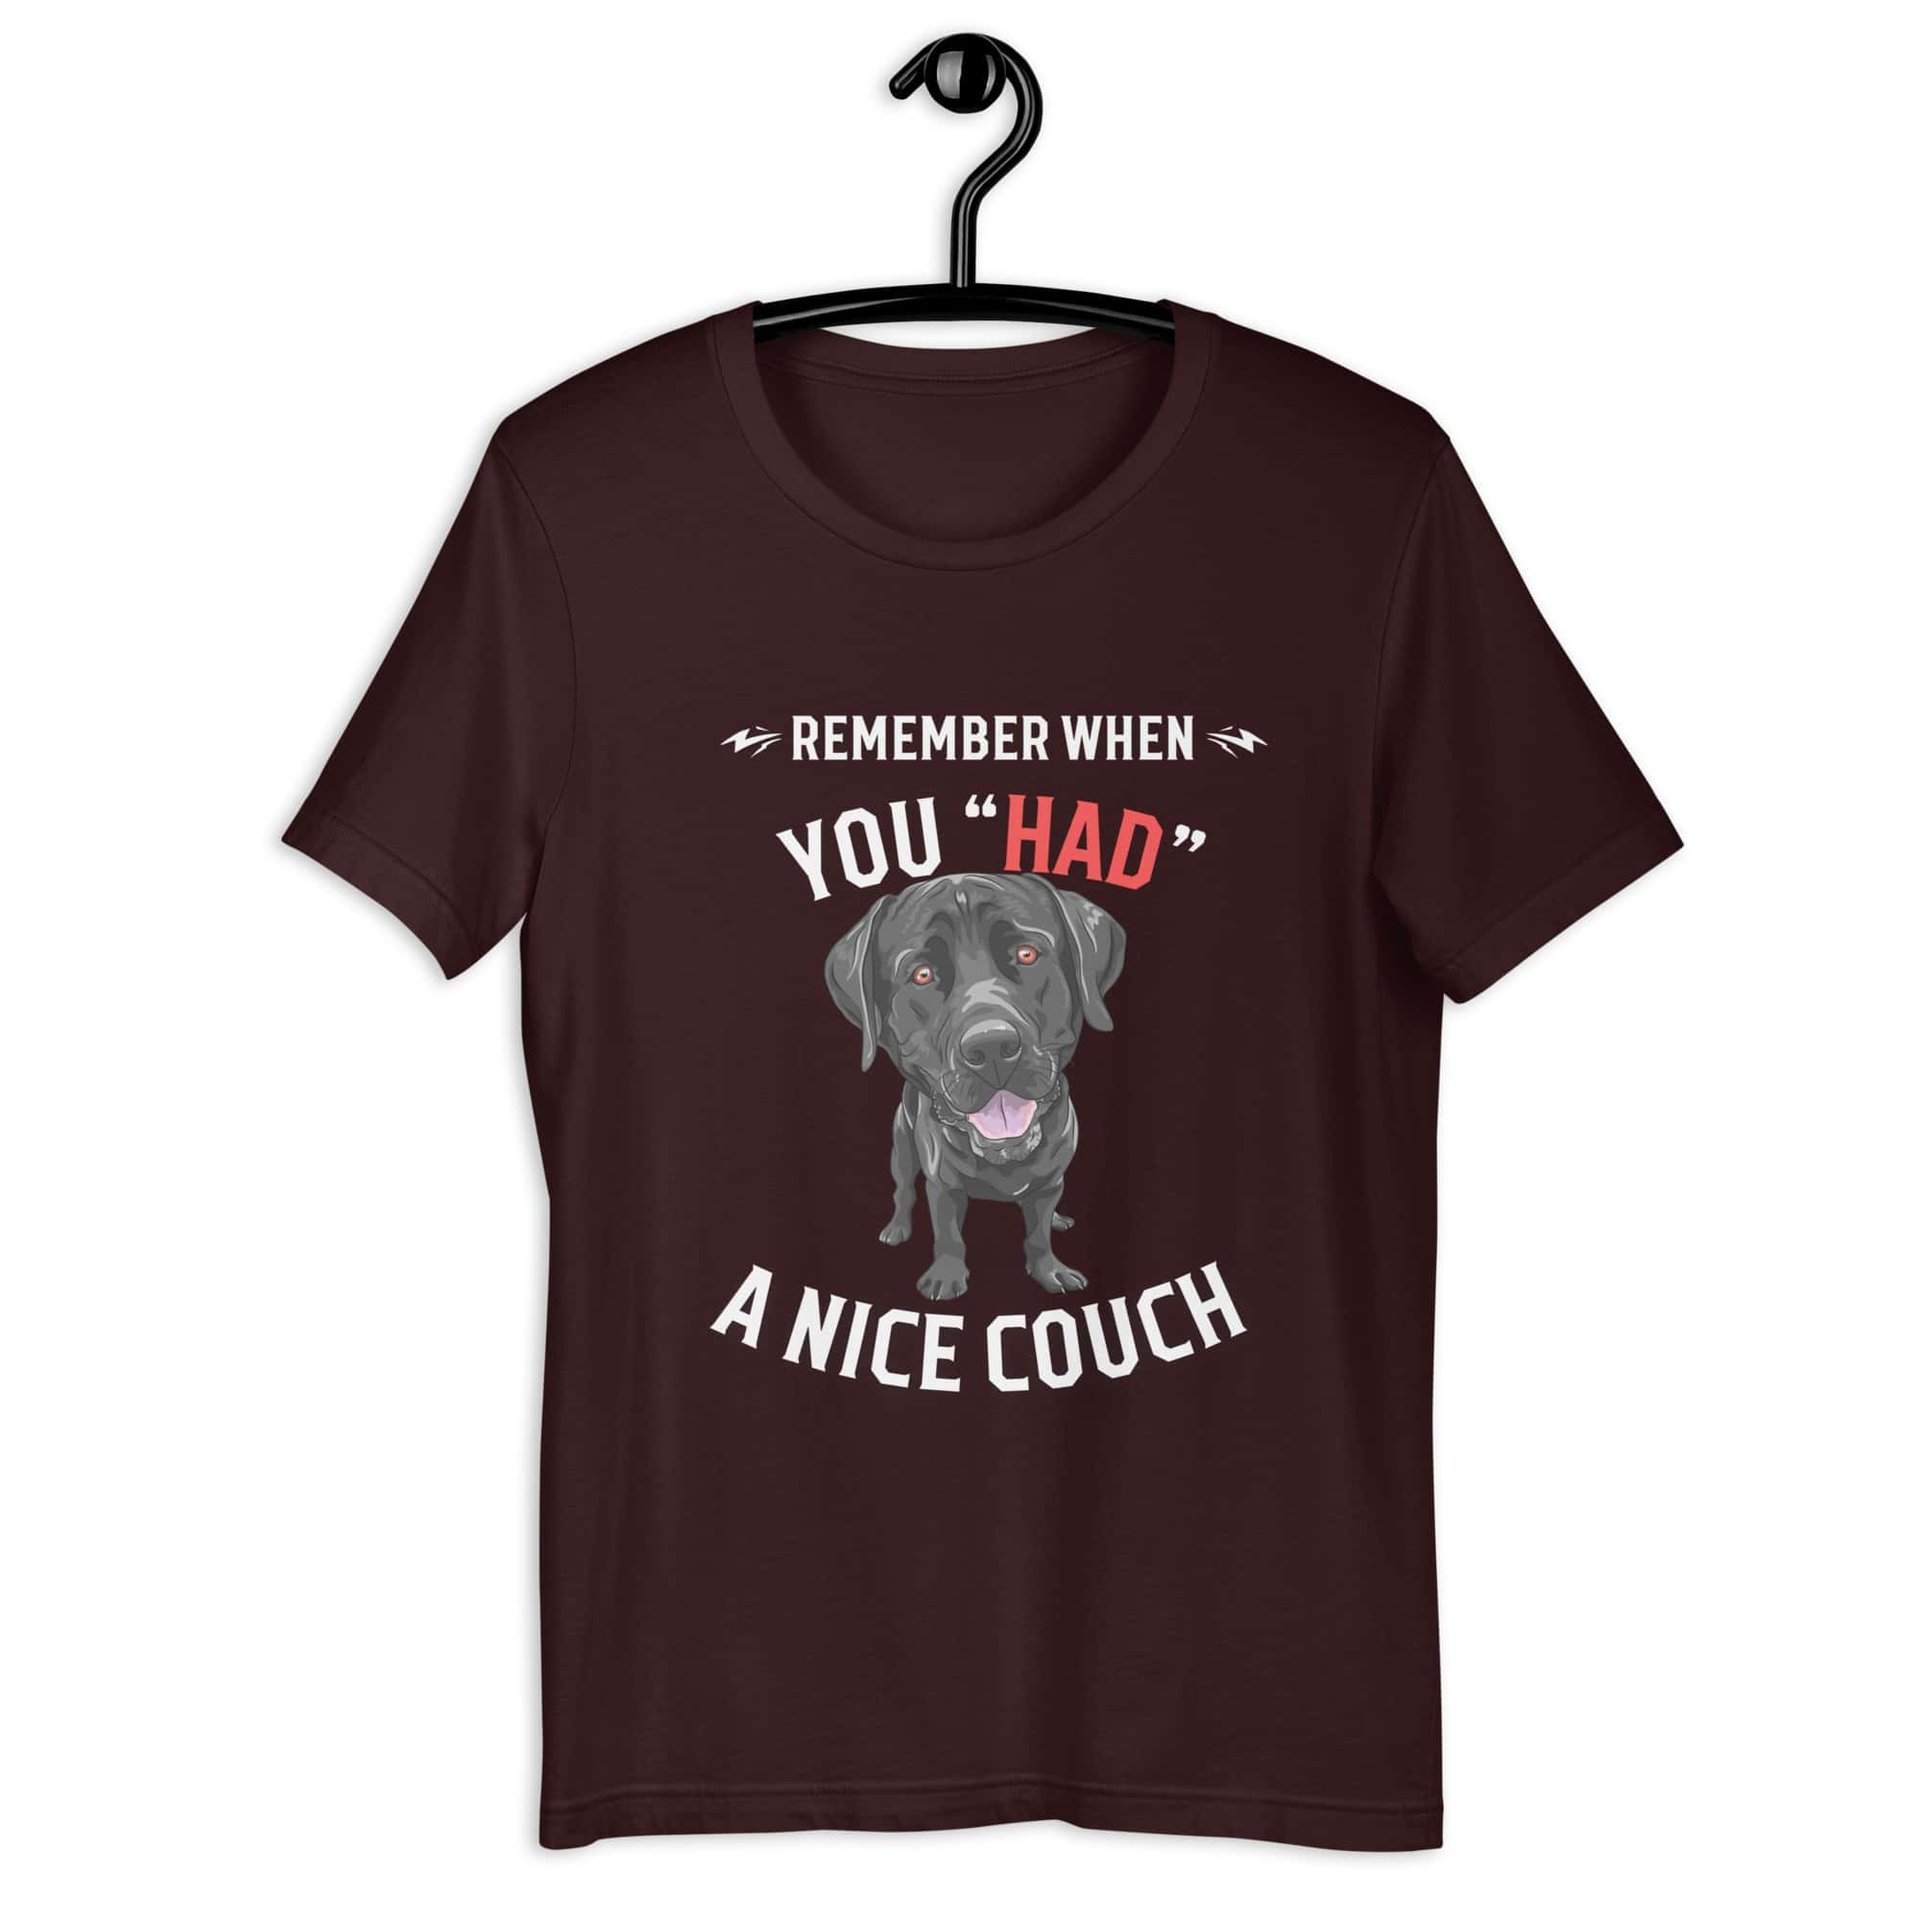 "Remember When You Had A Nice Couch" Funny Labrador Retriever Unisex T-Shirt brown